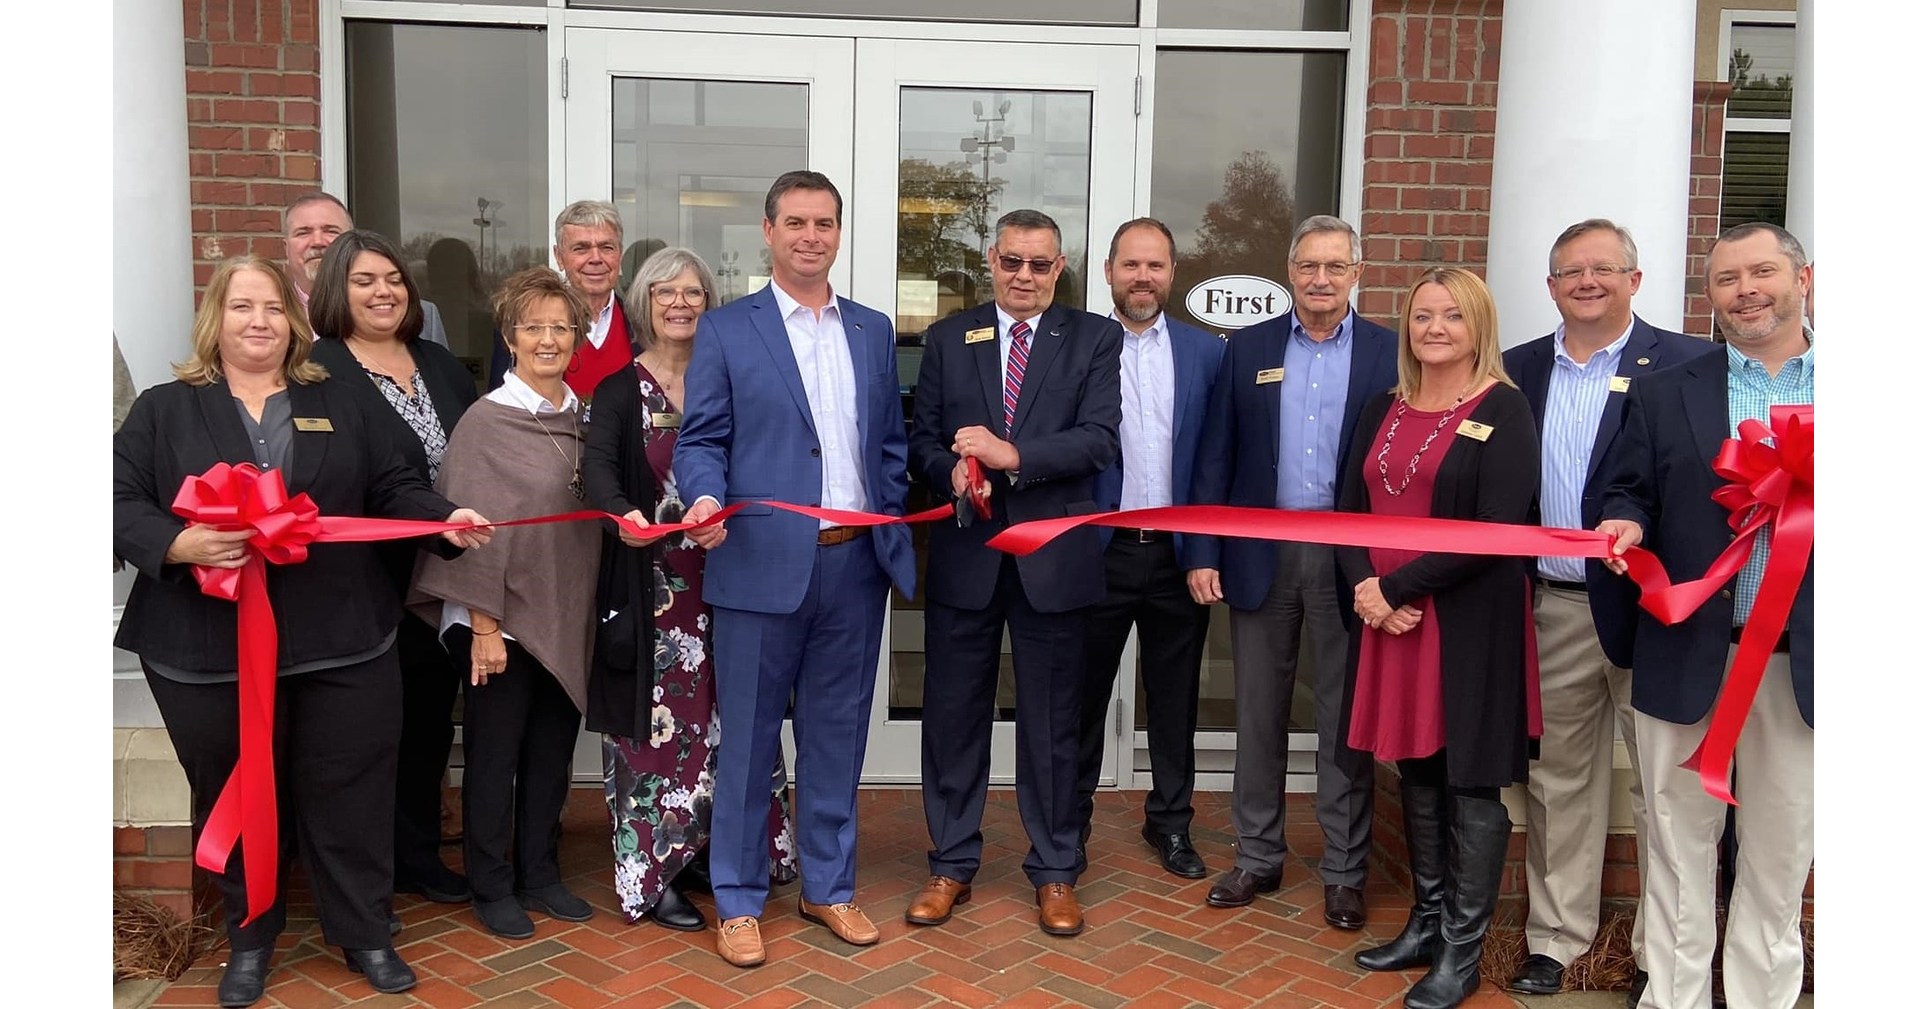   
																FIRST BANK & TRUST CO. OF VIRGINIA OPENS FULL-SERVICE BRANCH IN LILLINGTON, NORTH CAROLINA 
															 